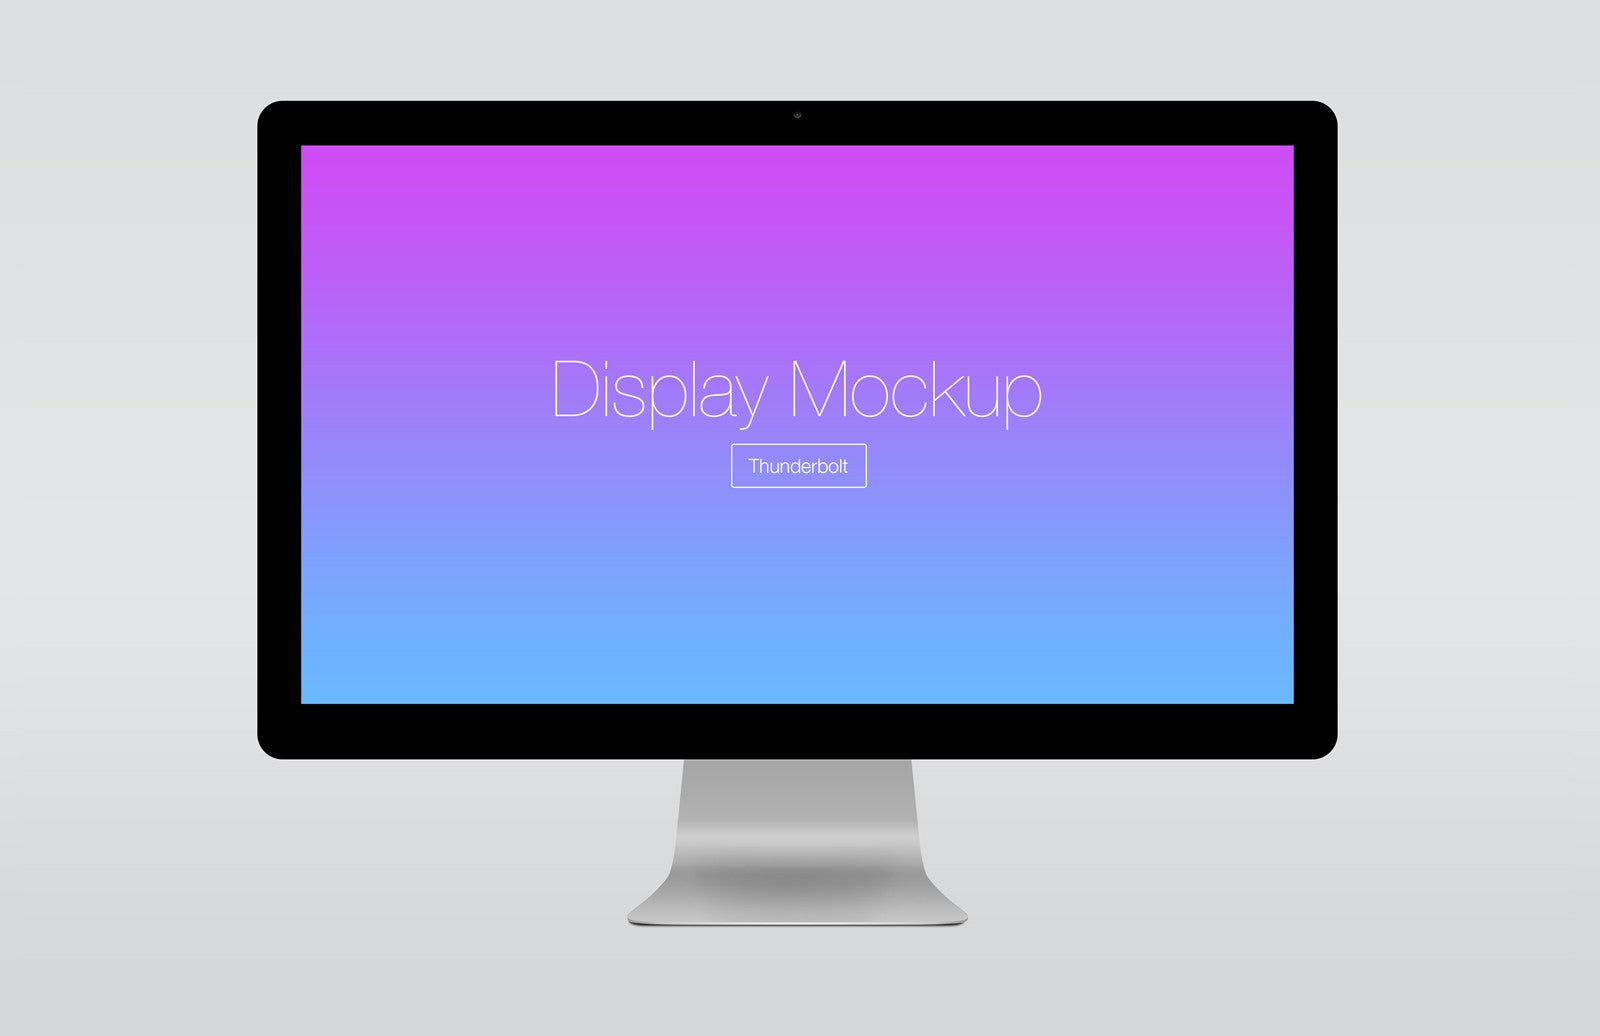 Download Desktop Monitor Mockup Free / Computer Monitor With Green Screen For Mock Up by ... / Electronic ...